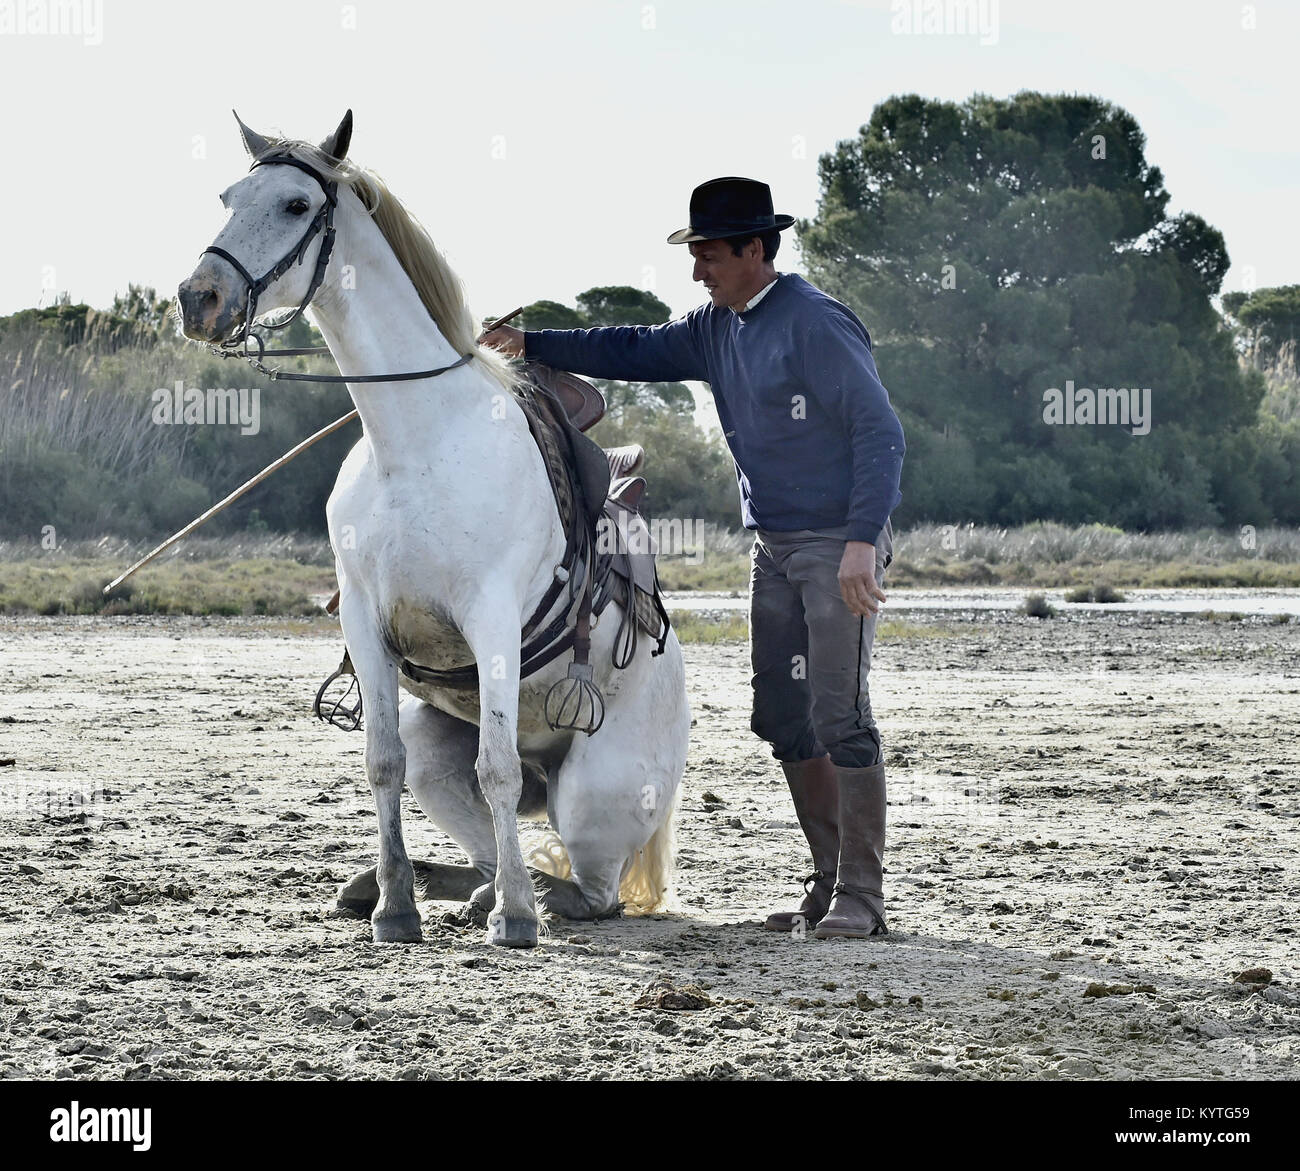 PROVENCE, FRANCE - MAY 07, 2015: Groom shows White Camargue Horse in the swamp nature reserve in Parc Regional de Camargue - Provence, France Stock Photo